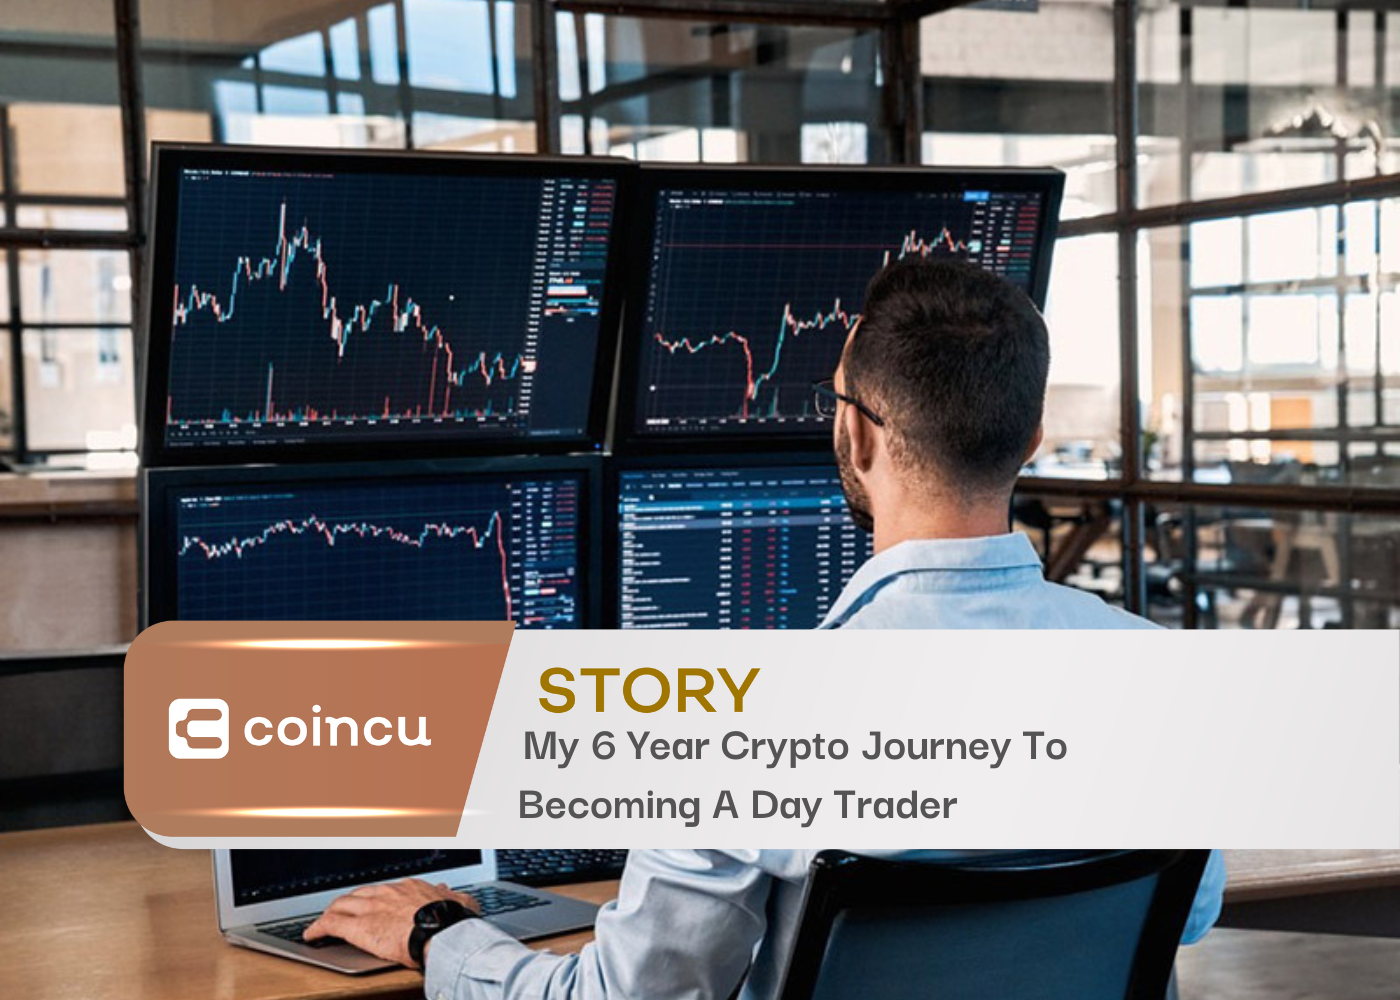 My 6 Year Crypto Journey To